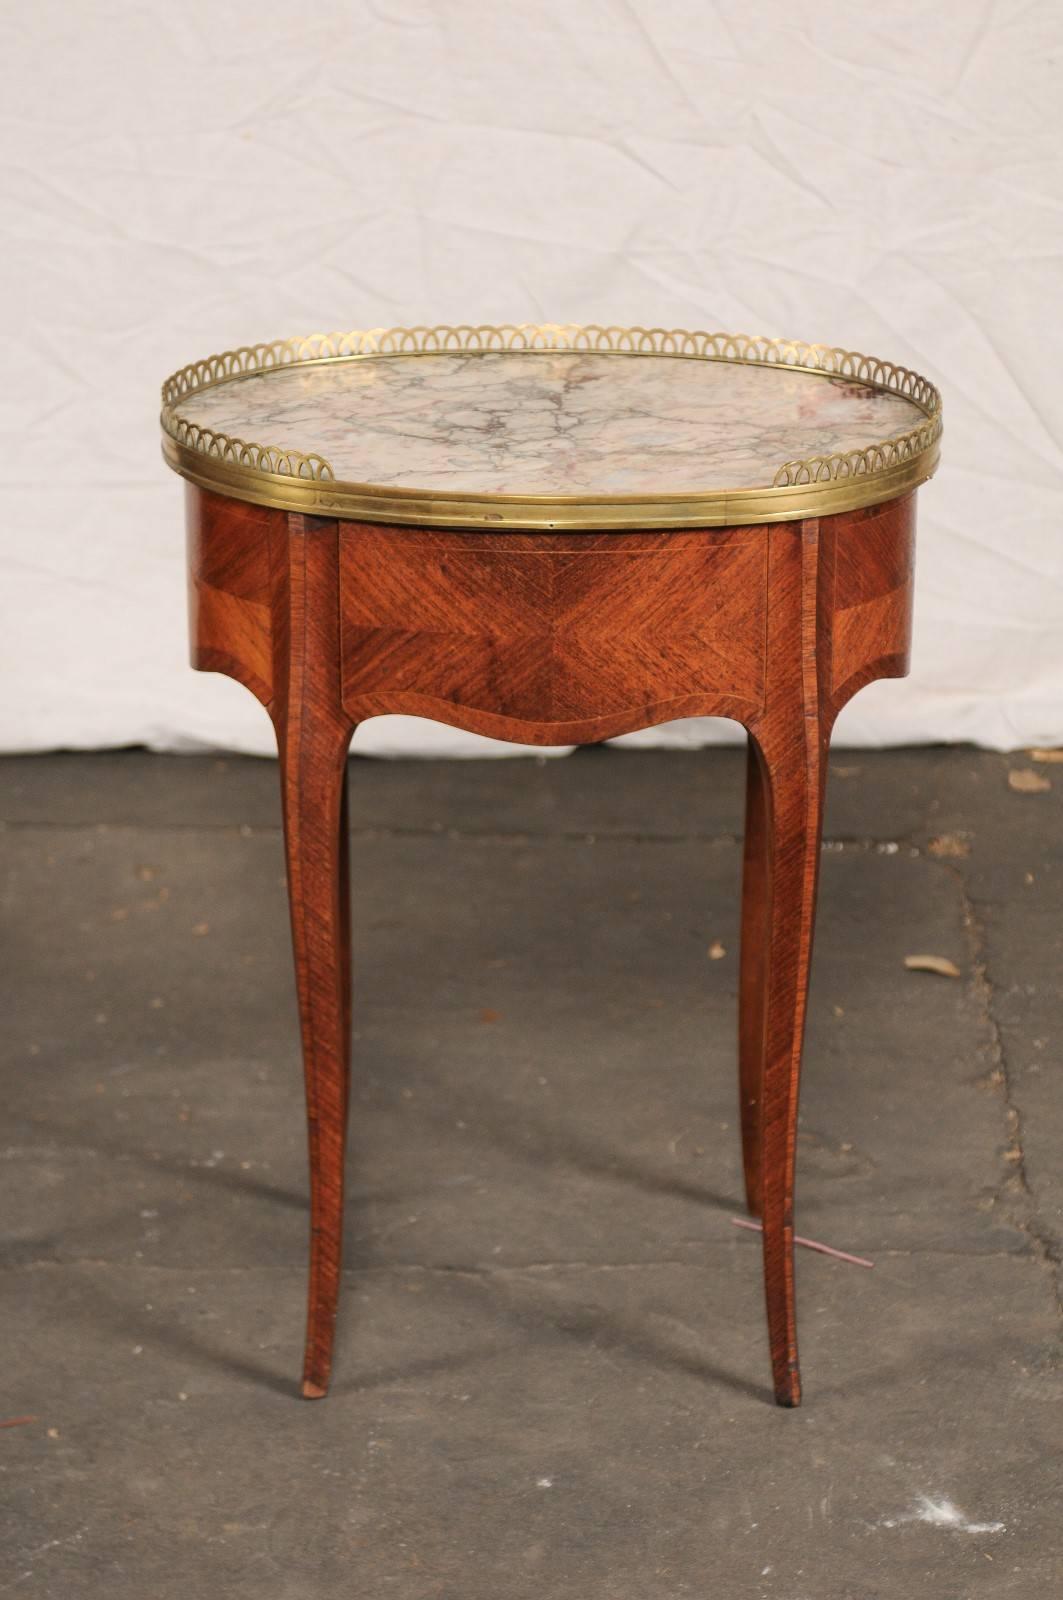 Early 20th Century Pair of circa 1900 French Marble-Top, Bronze Gallery Tables with Drawers